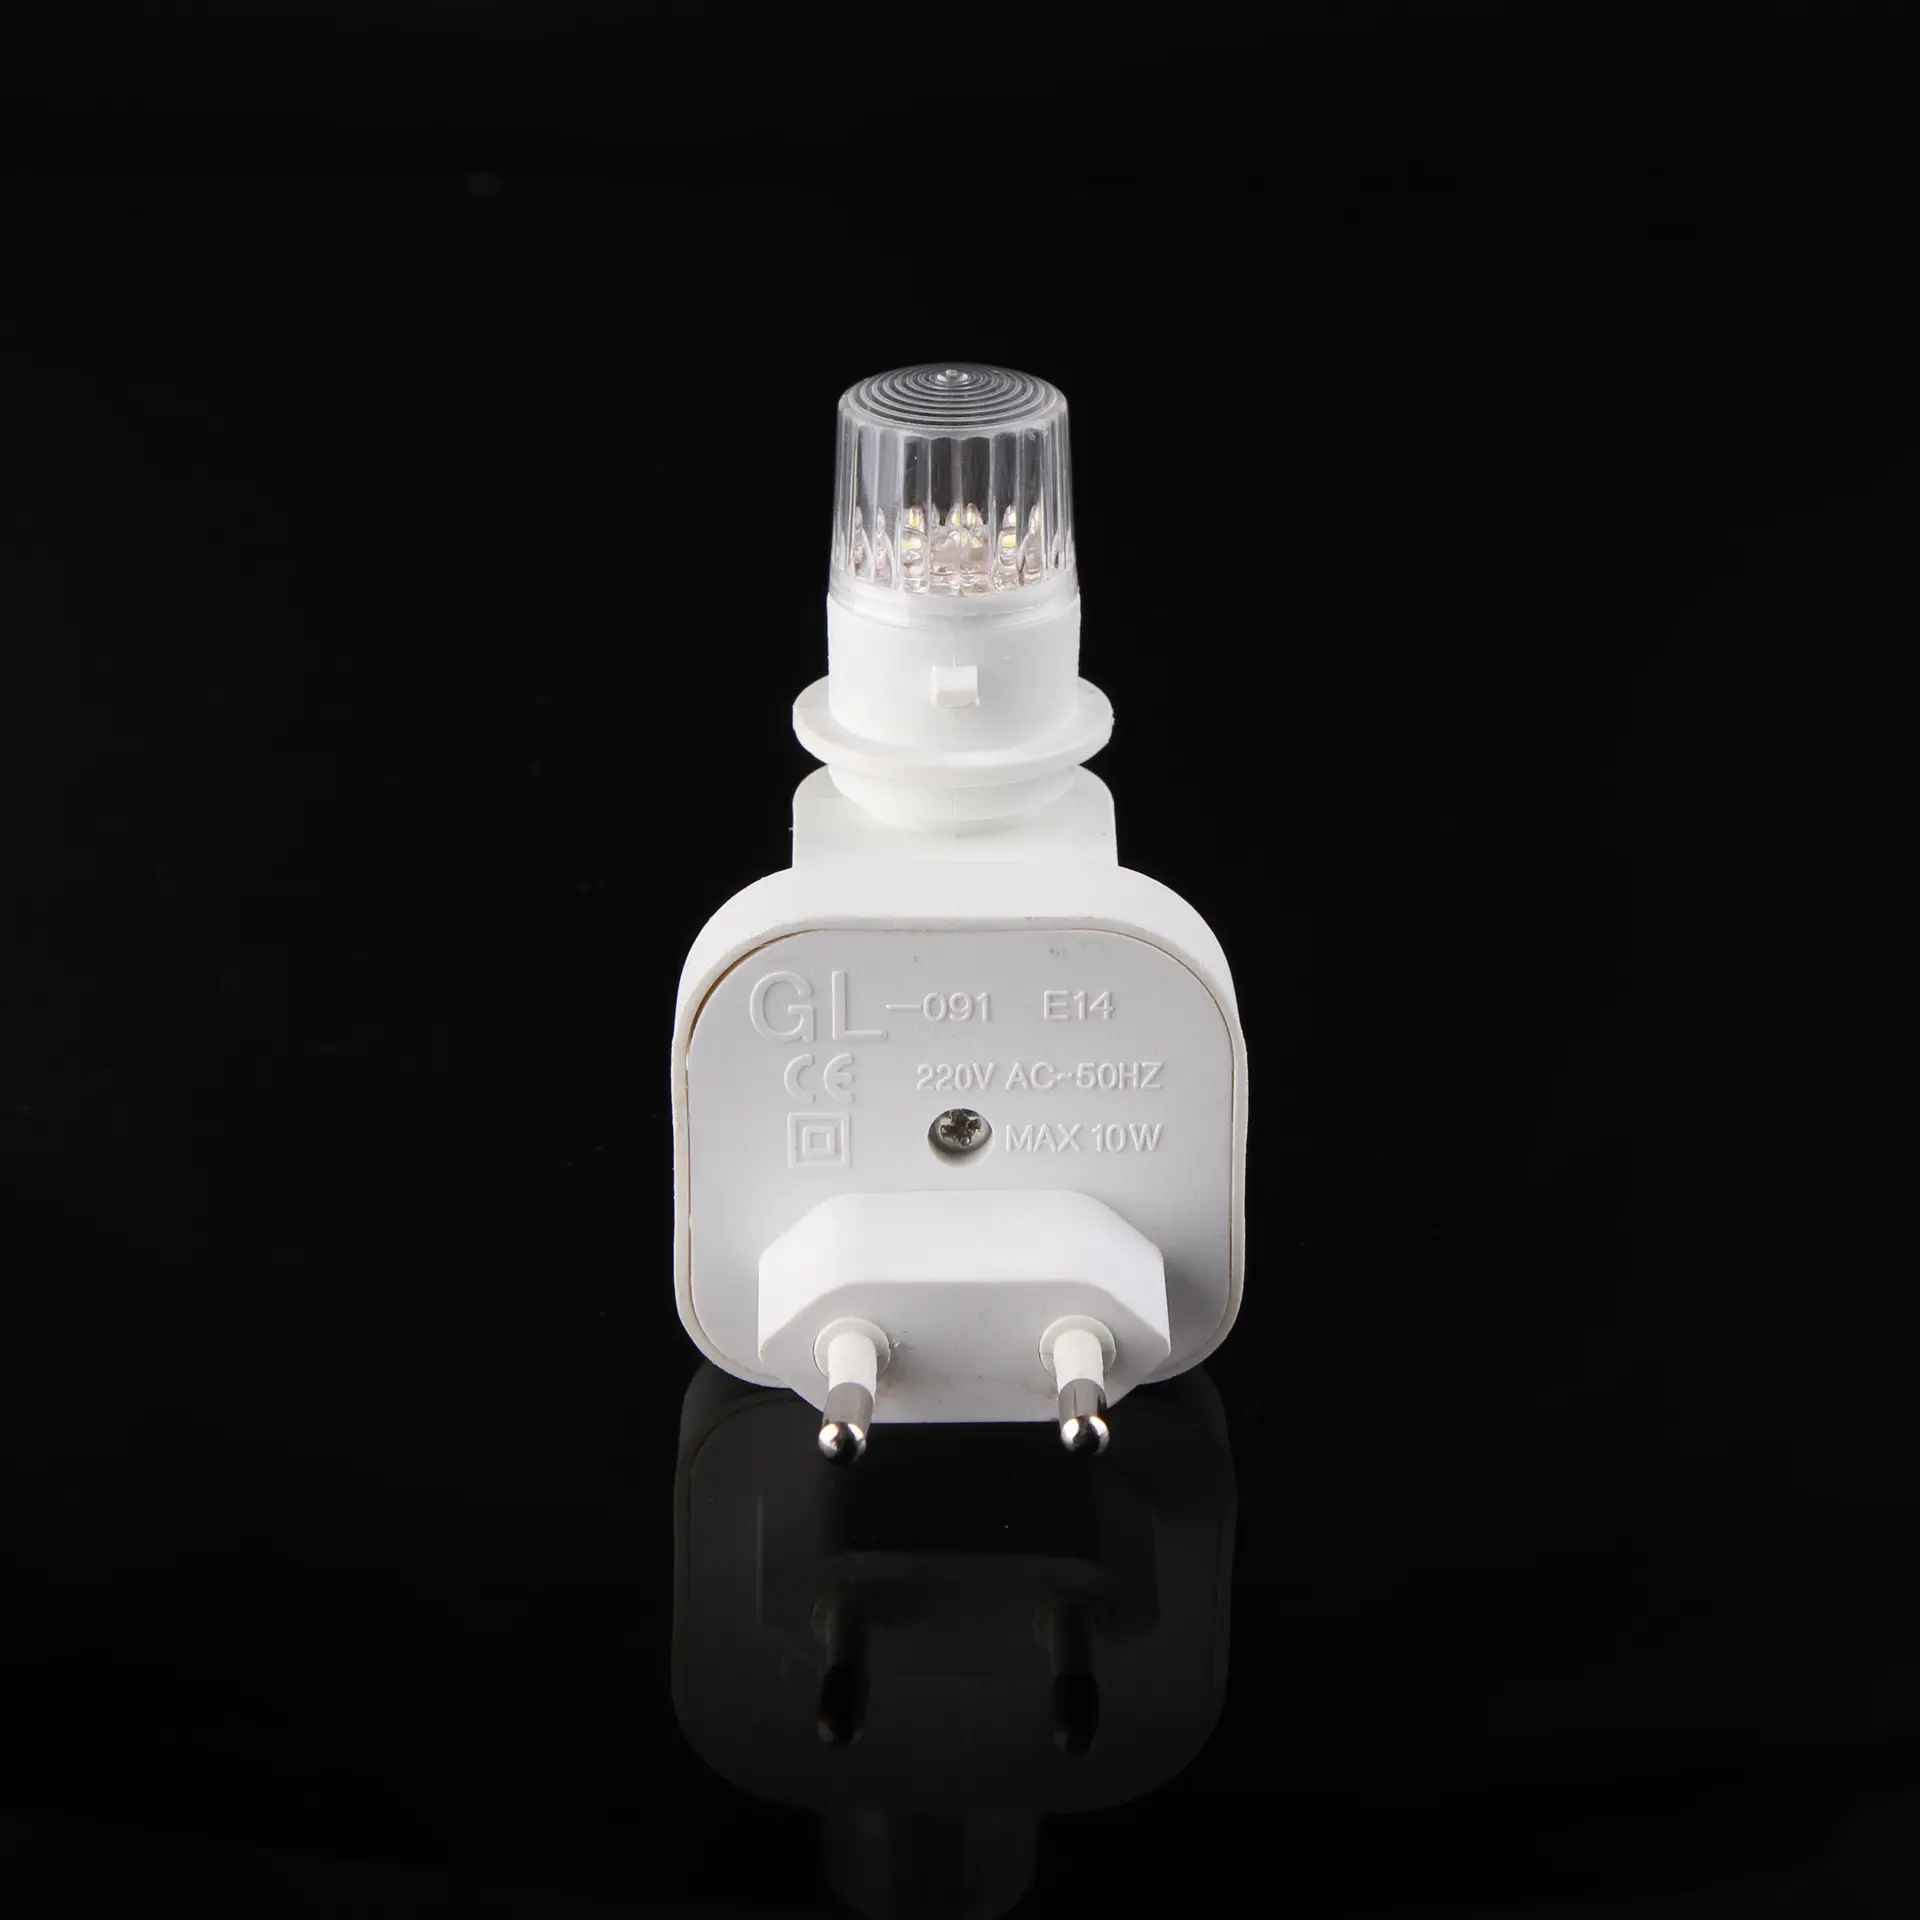 CE ROHS approved E14 switch LED lighting night light socket with European plug in lamp holder and 15W and 220V or 240V